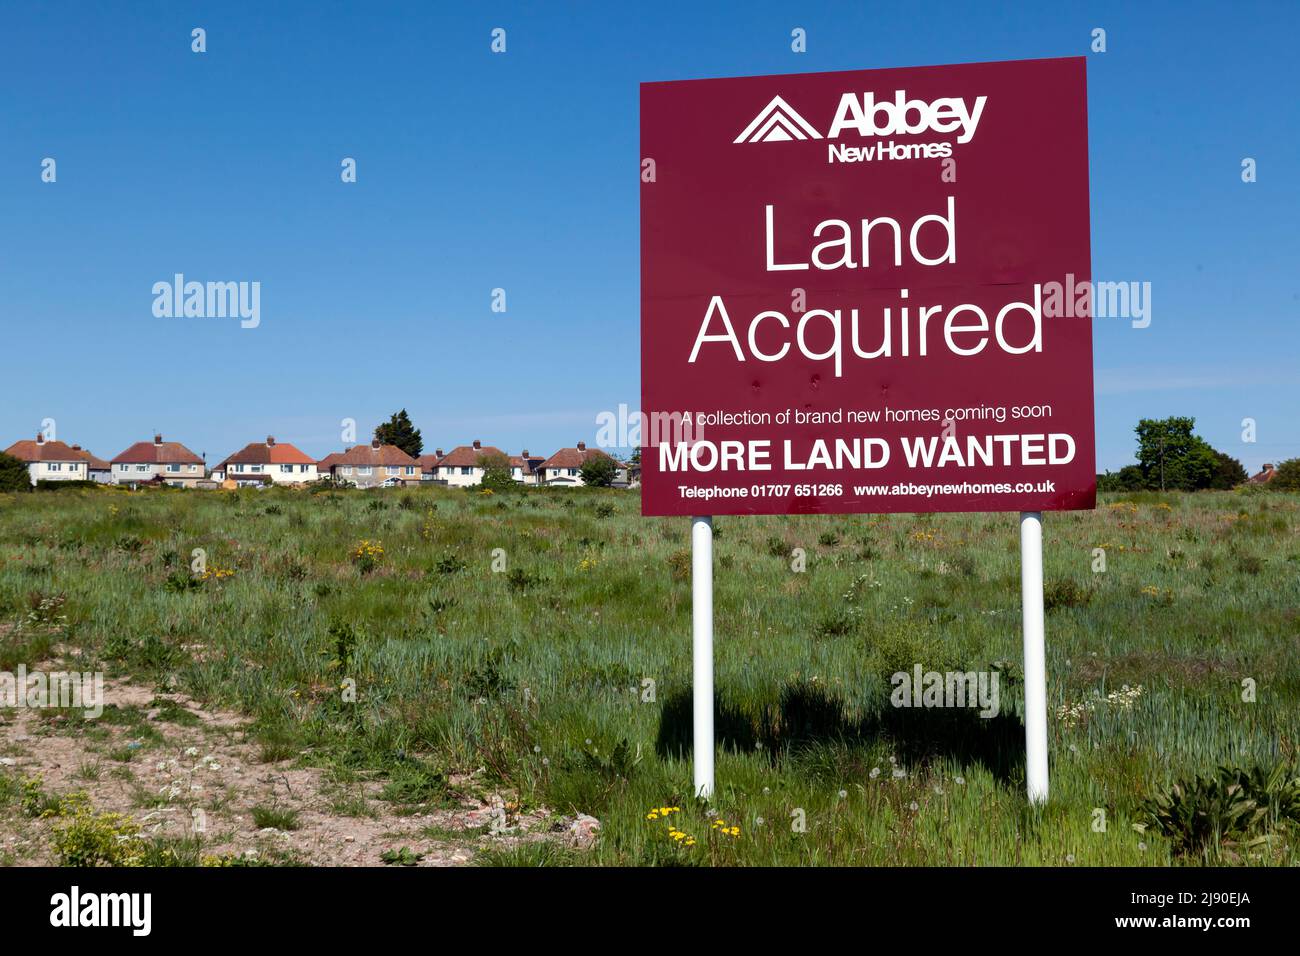 Abbey New Homes announcing that they are going to build 100 new dwellings in a field  at Cross Road, Walmer Deal. Stock Photo